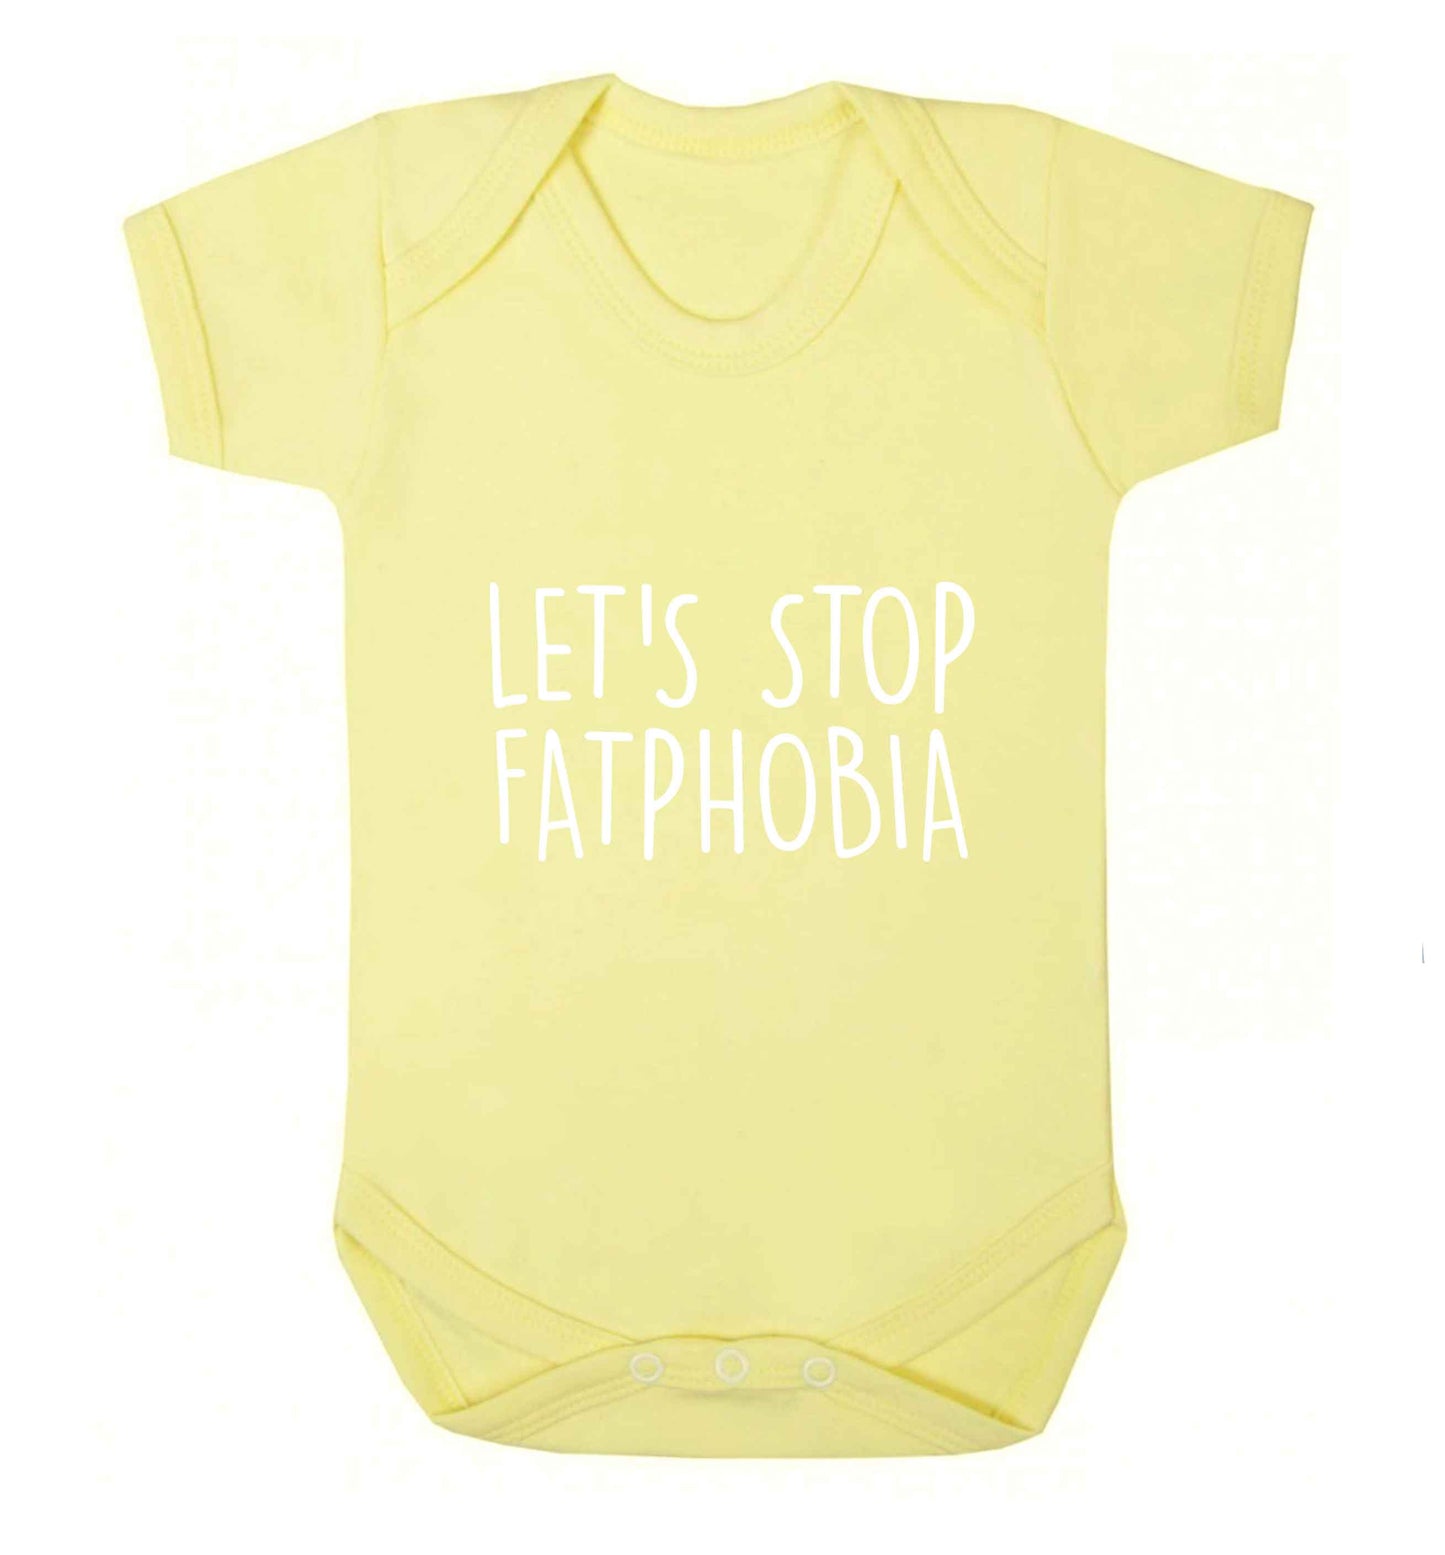 Let's stop fatphobia baby vest pale yellow 18-24 months